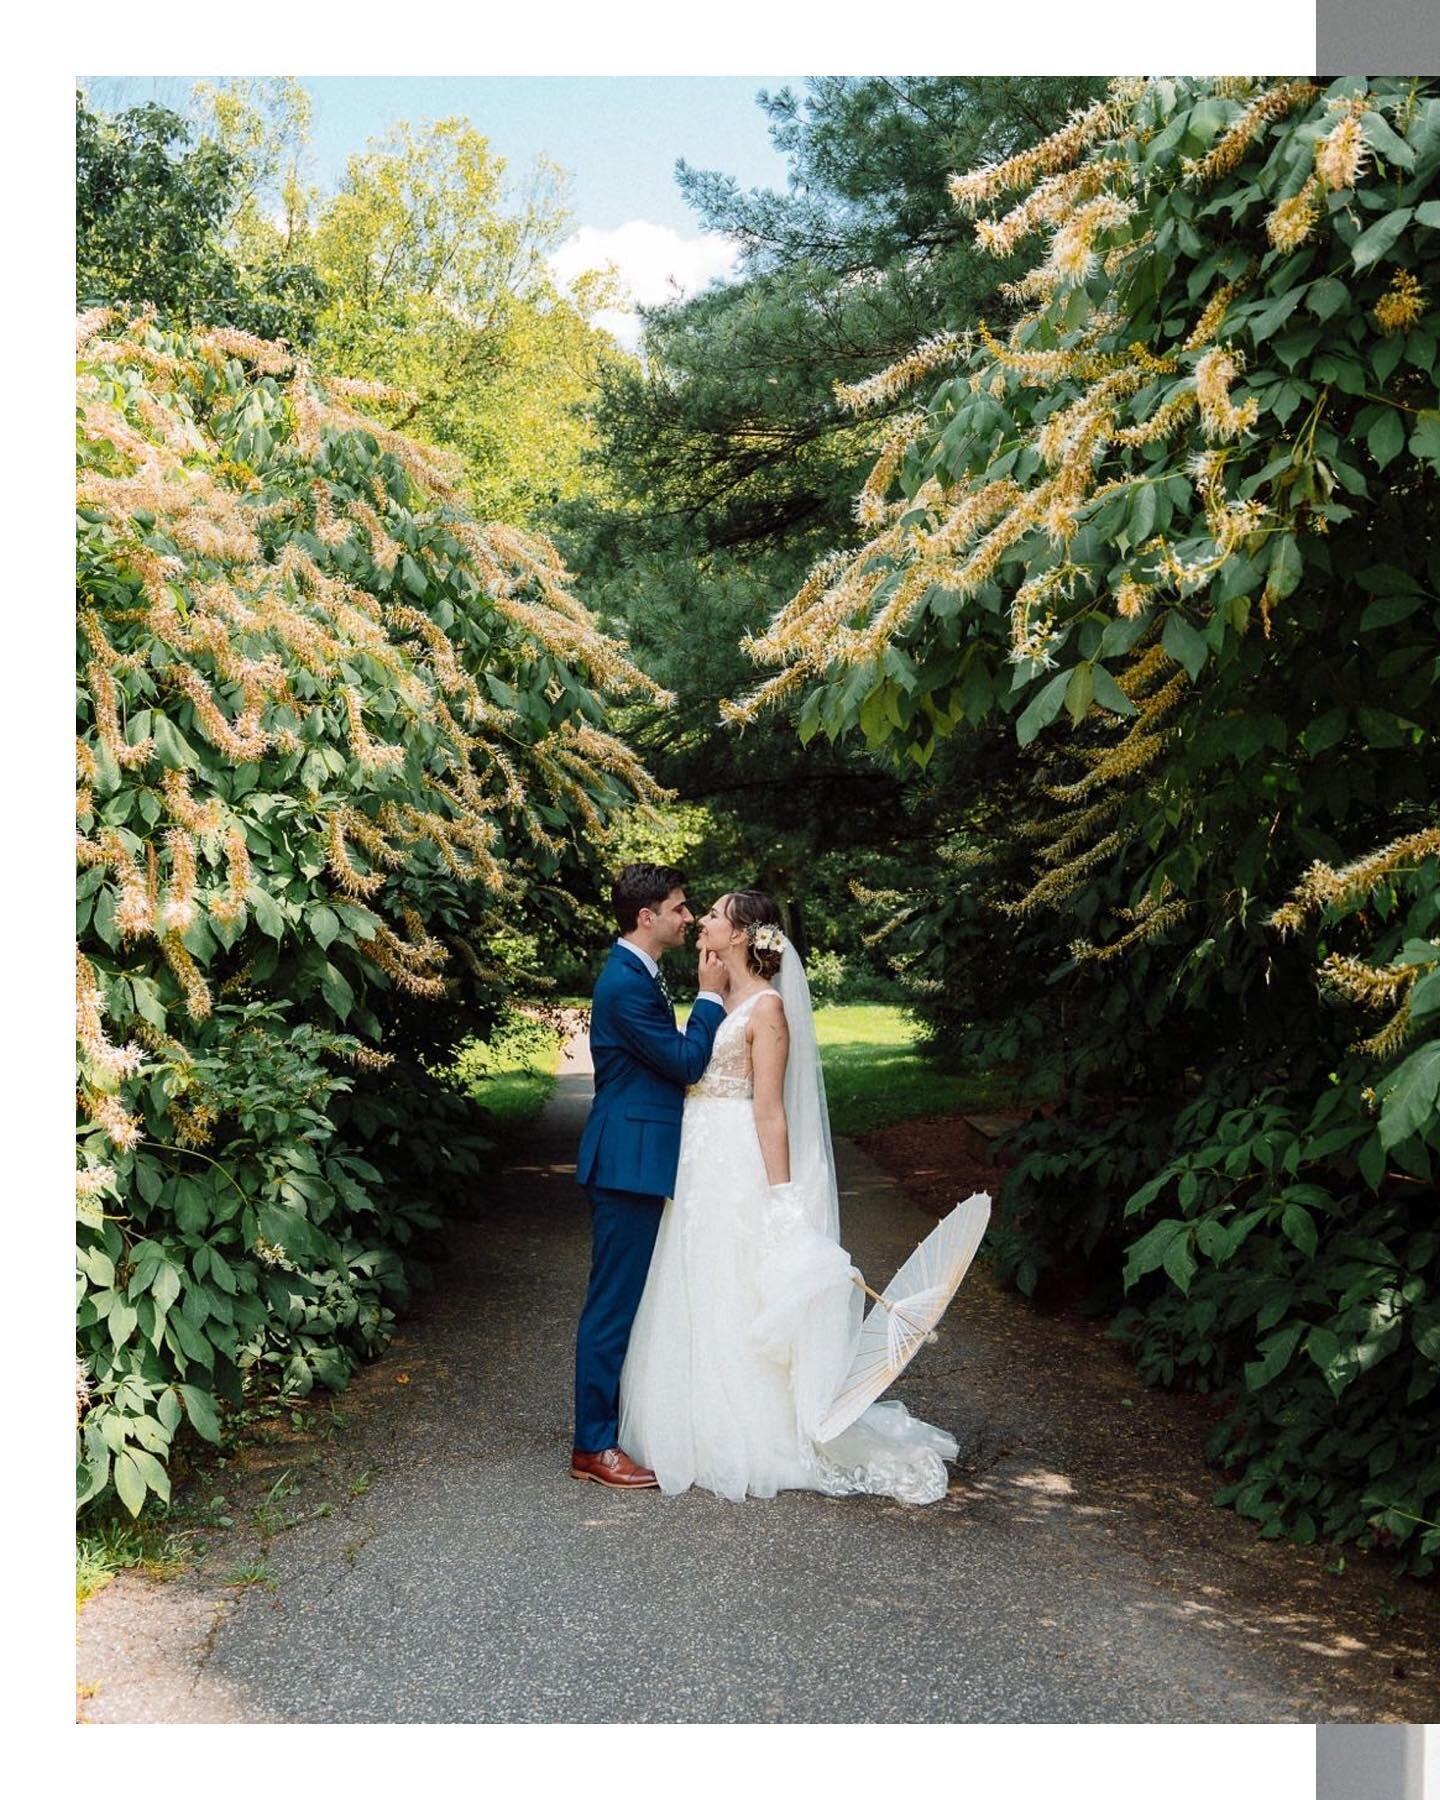 The leaves are changing here in Philly but we&rsquo;re still feeling those July vibes&hellip;

@jackyn22 @mikerossini

#phillyphotographer #philadelphiaphotographer #phillyweddingphotographer #philadelphiaweddingphotographer #phillyfilmphotographer #